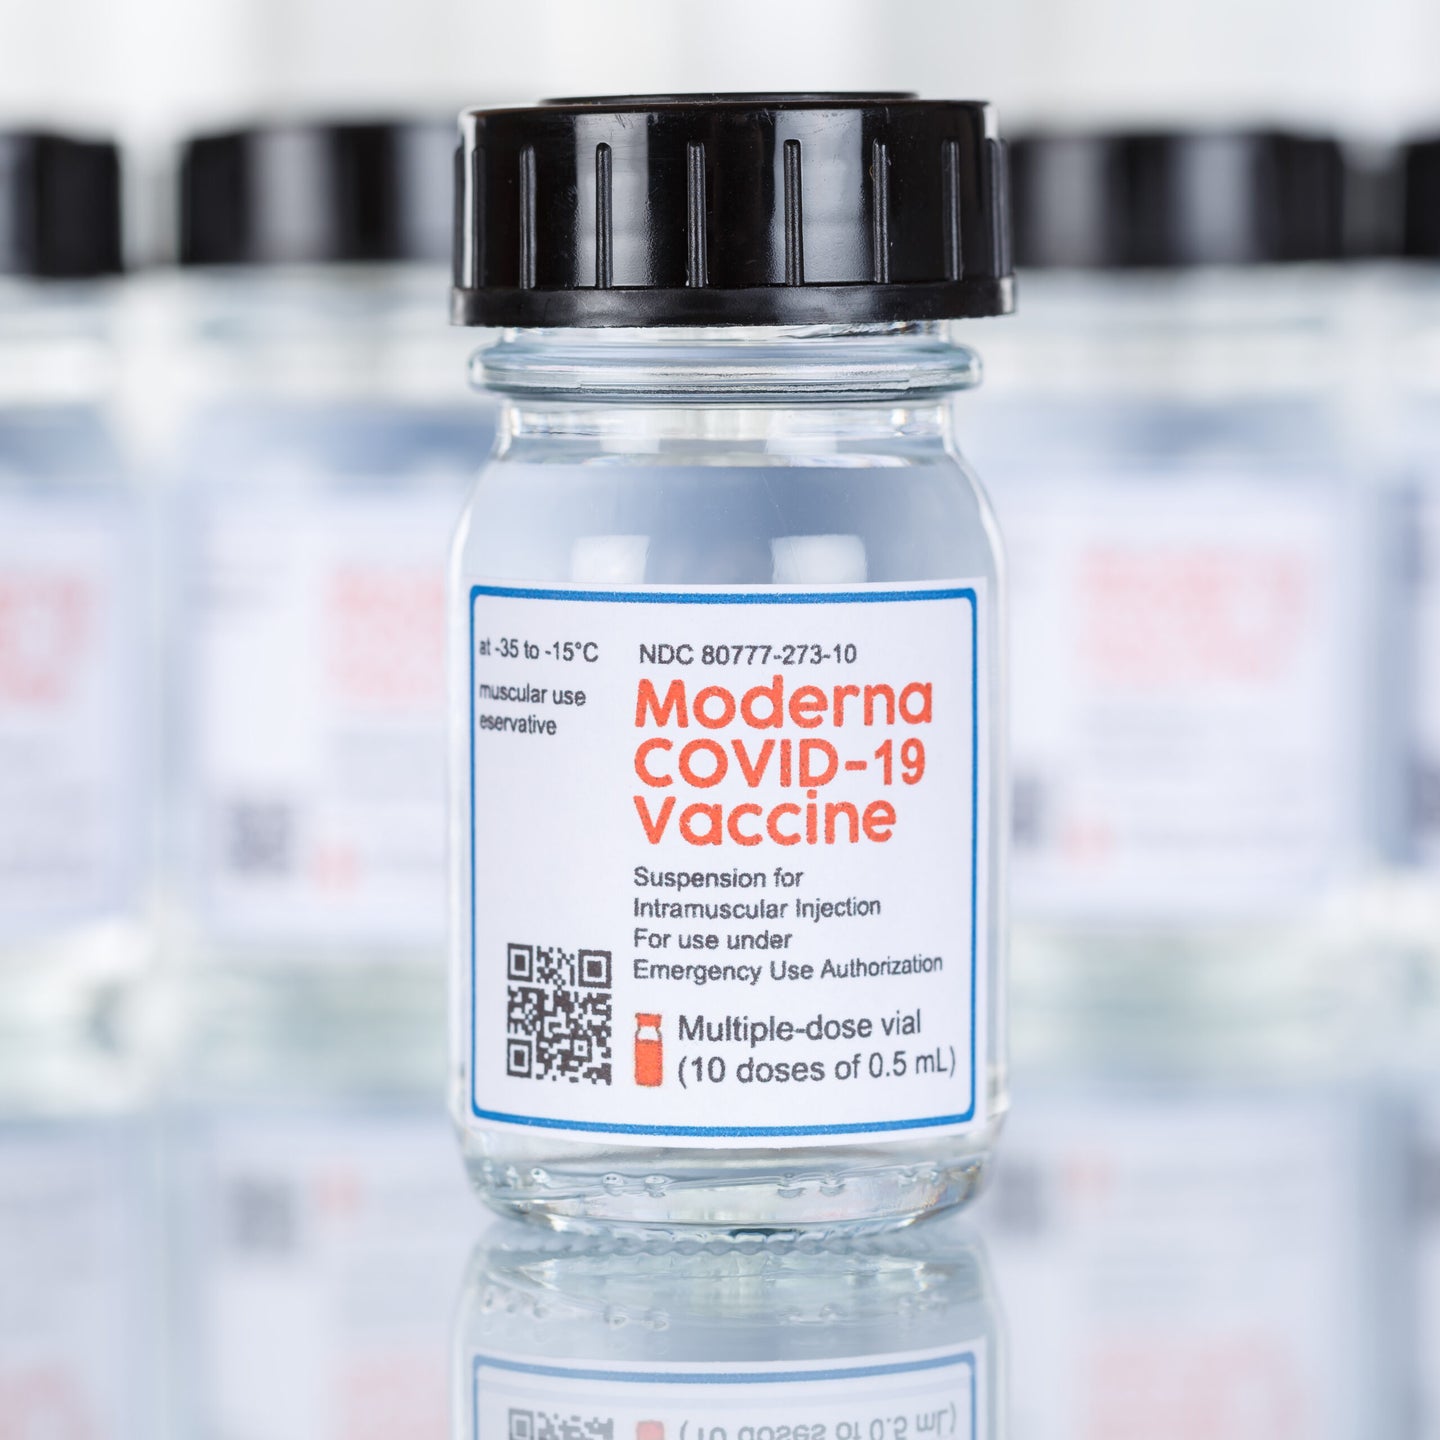 In a new statement outlining new emergency use authorizations, the FDA says that individuals 65 years and older, as well as adults with high risk of severe COVID-19 or high exposure to the virus, can get an additional single booster dose of Moderna at least 6 months out from their first set of shots. 